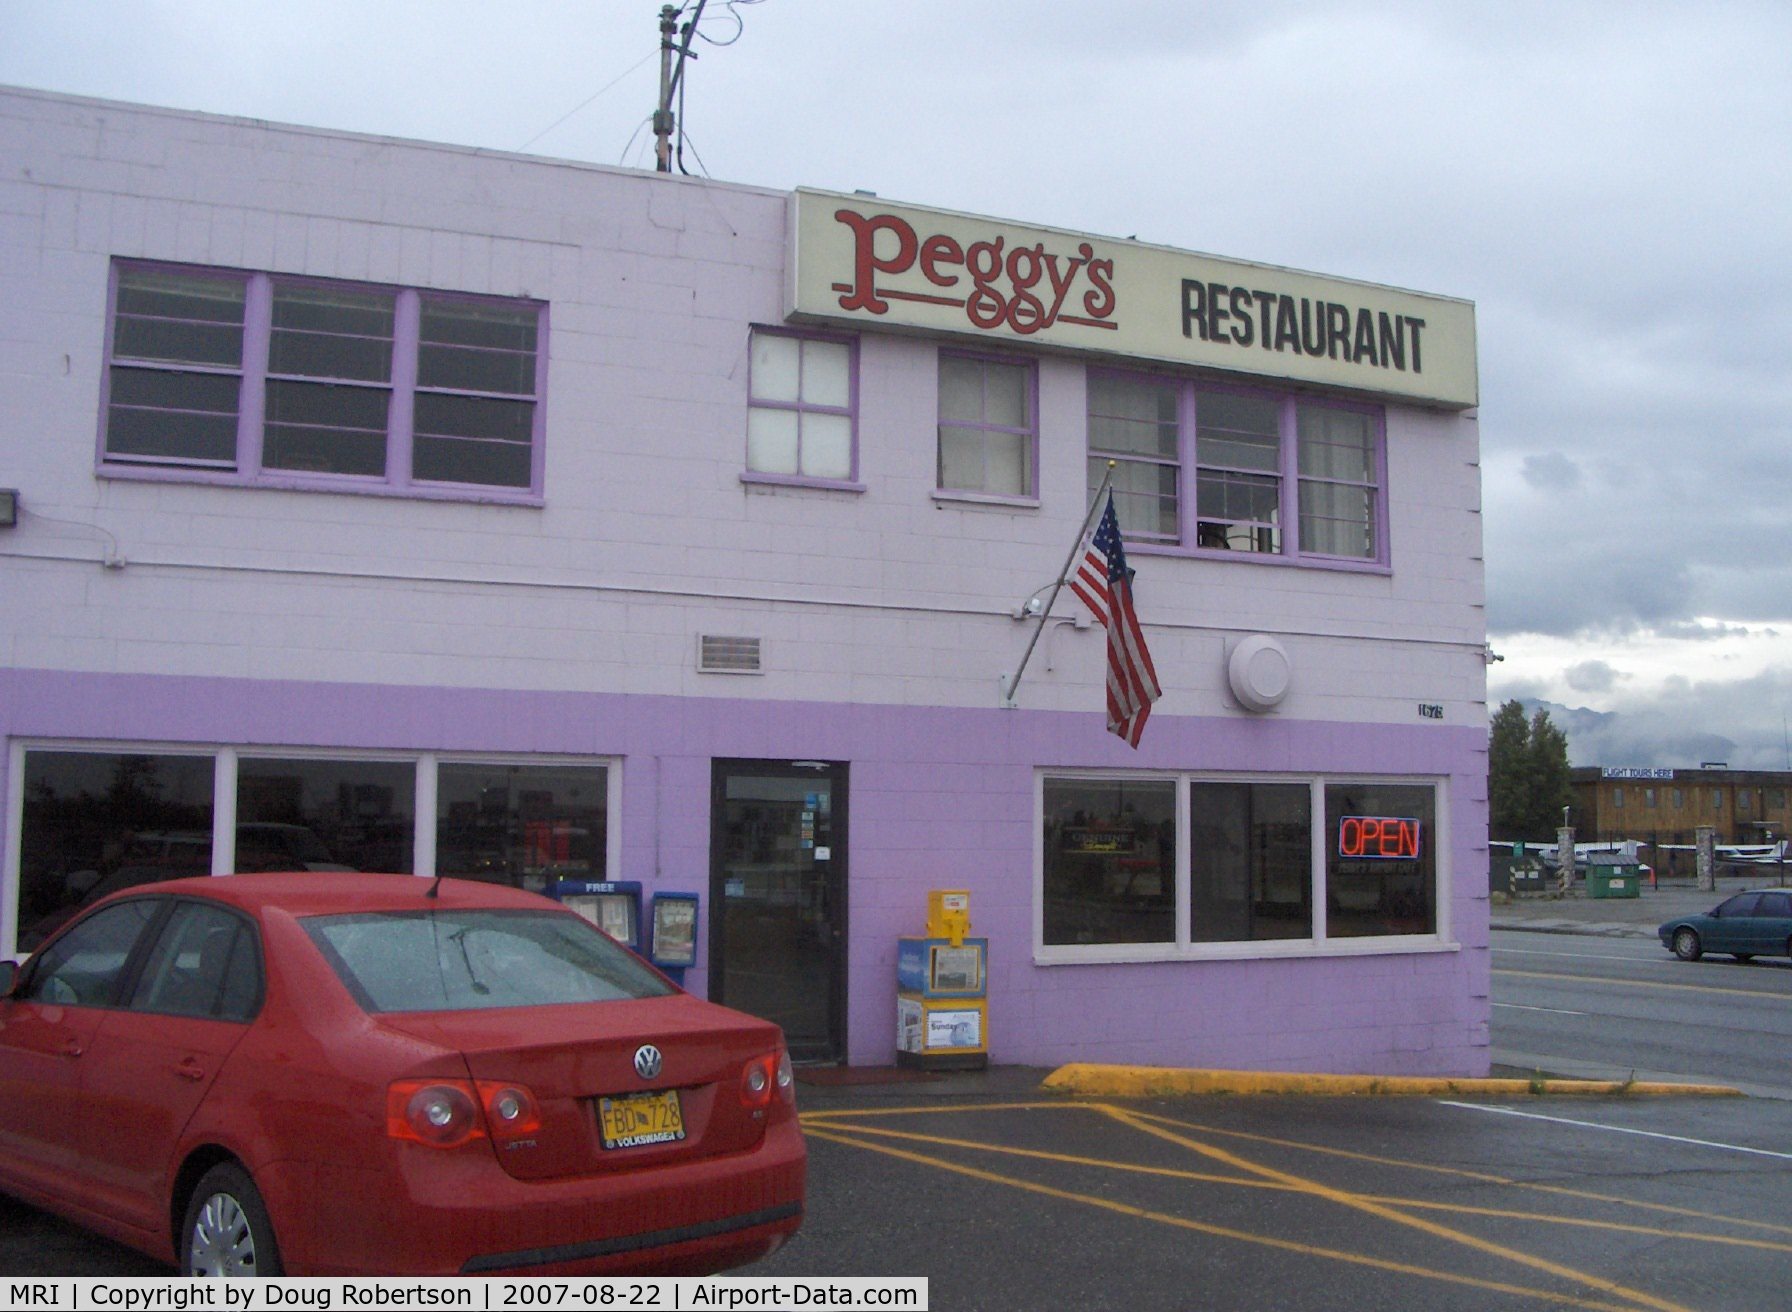 Merrill Field Airport (MRI) - Peggy's Airport Restaurant. Famous for sugarless pies, also reindeer sausage